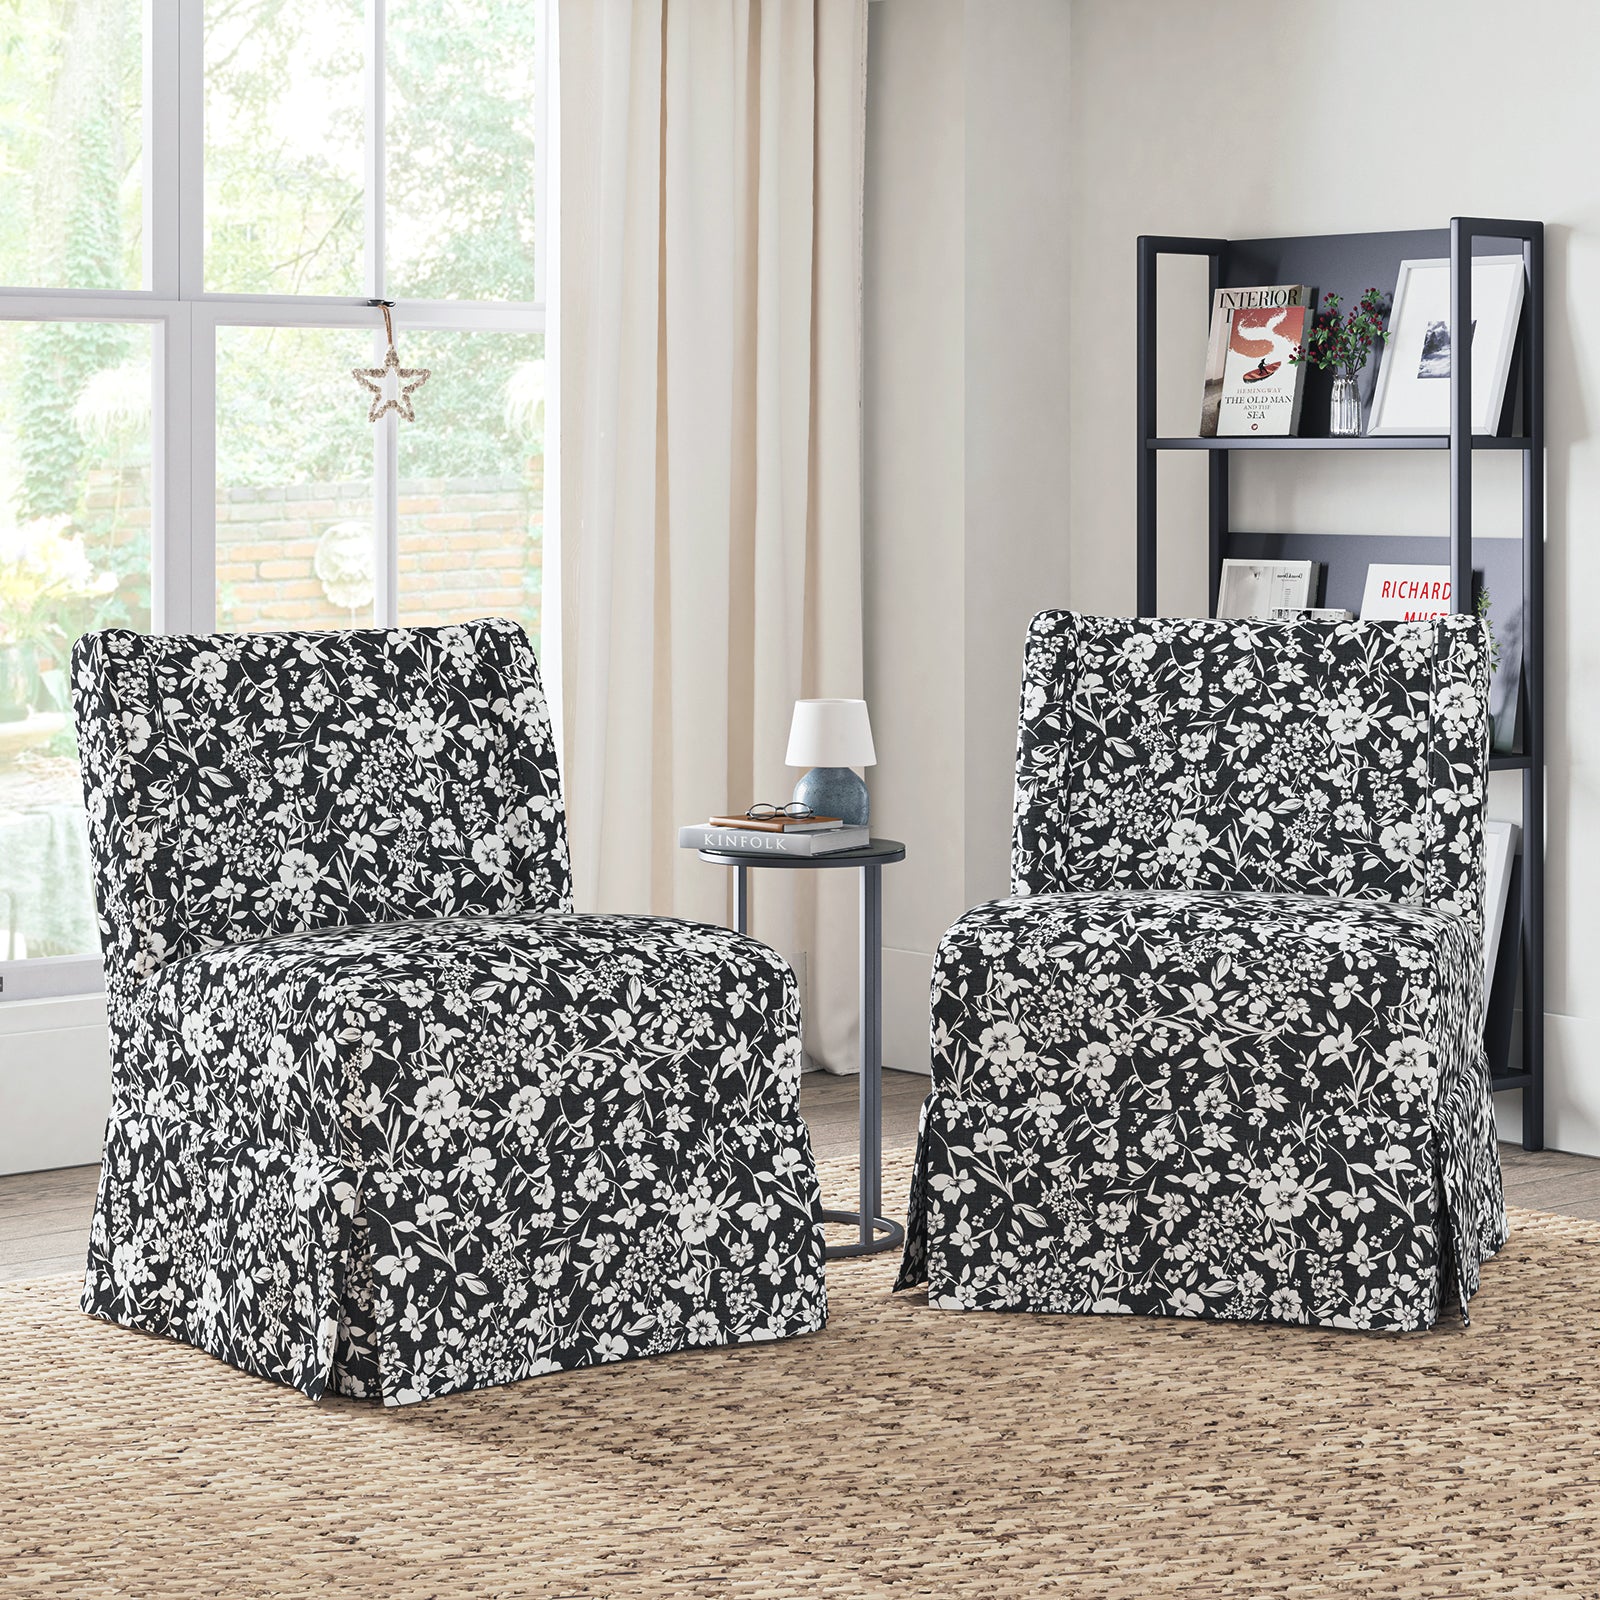 Ellmar Slipper Chair with Washable Slipcover and Solid Wood Legs Set Of 2